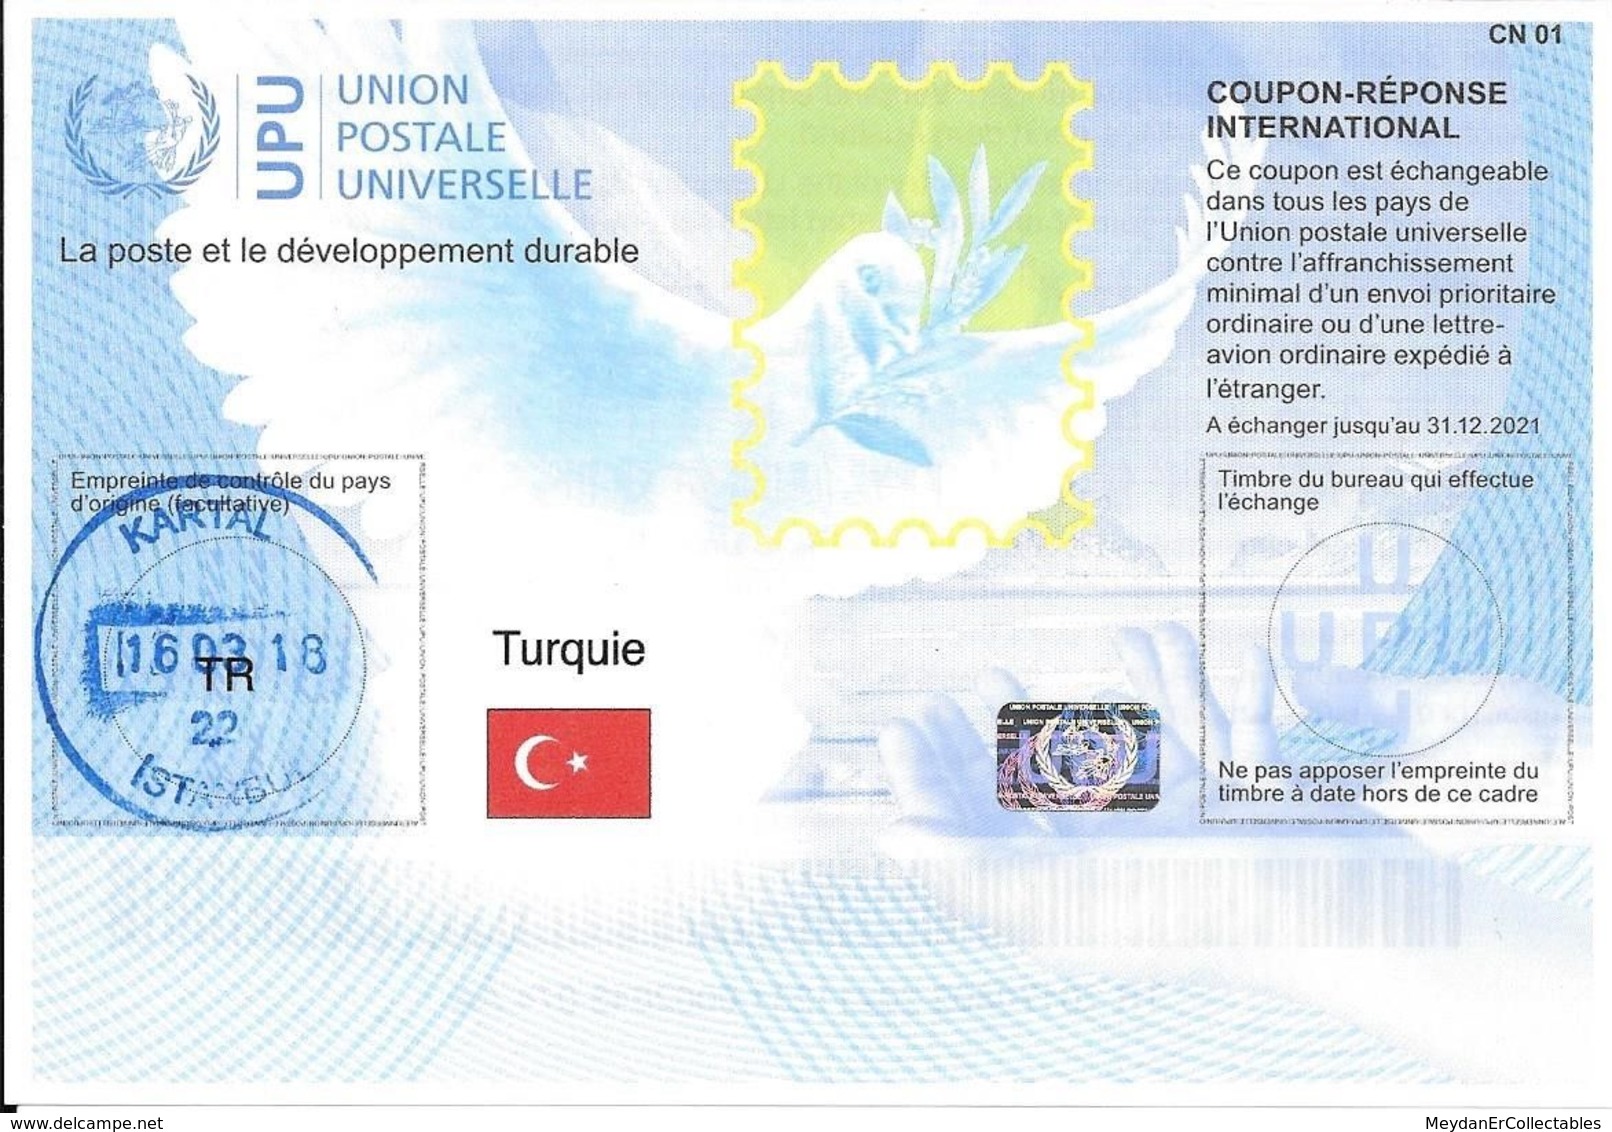 TURKEY - (IRC) INTERNATIONAL REPLY COUPON (exp. 31.12.2021) (POSTMARKED), MNH - Entiers Postaux